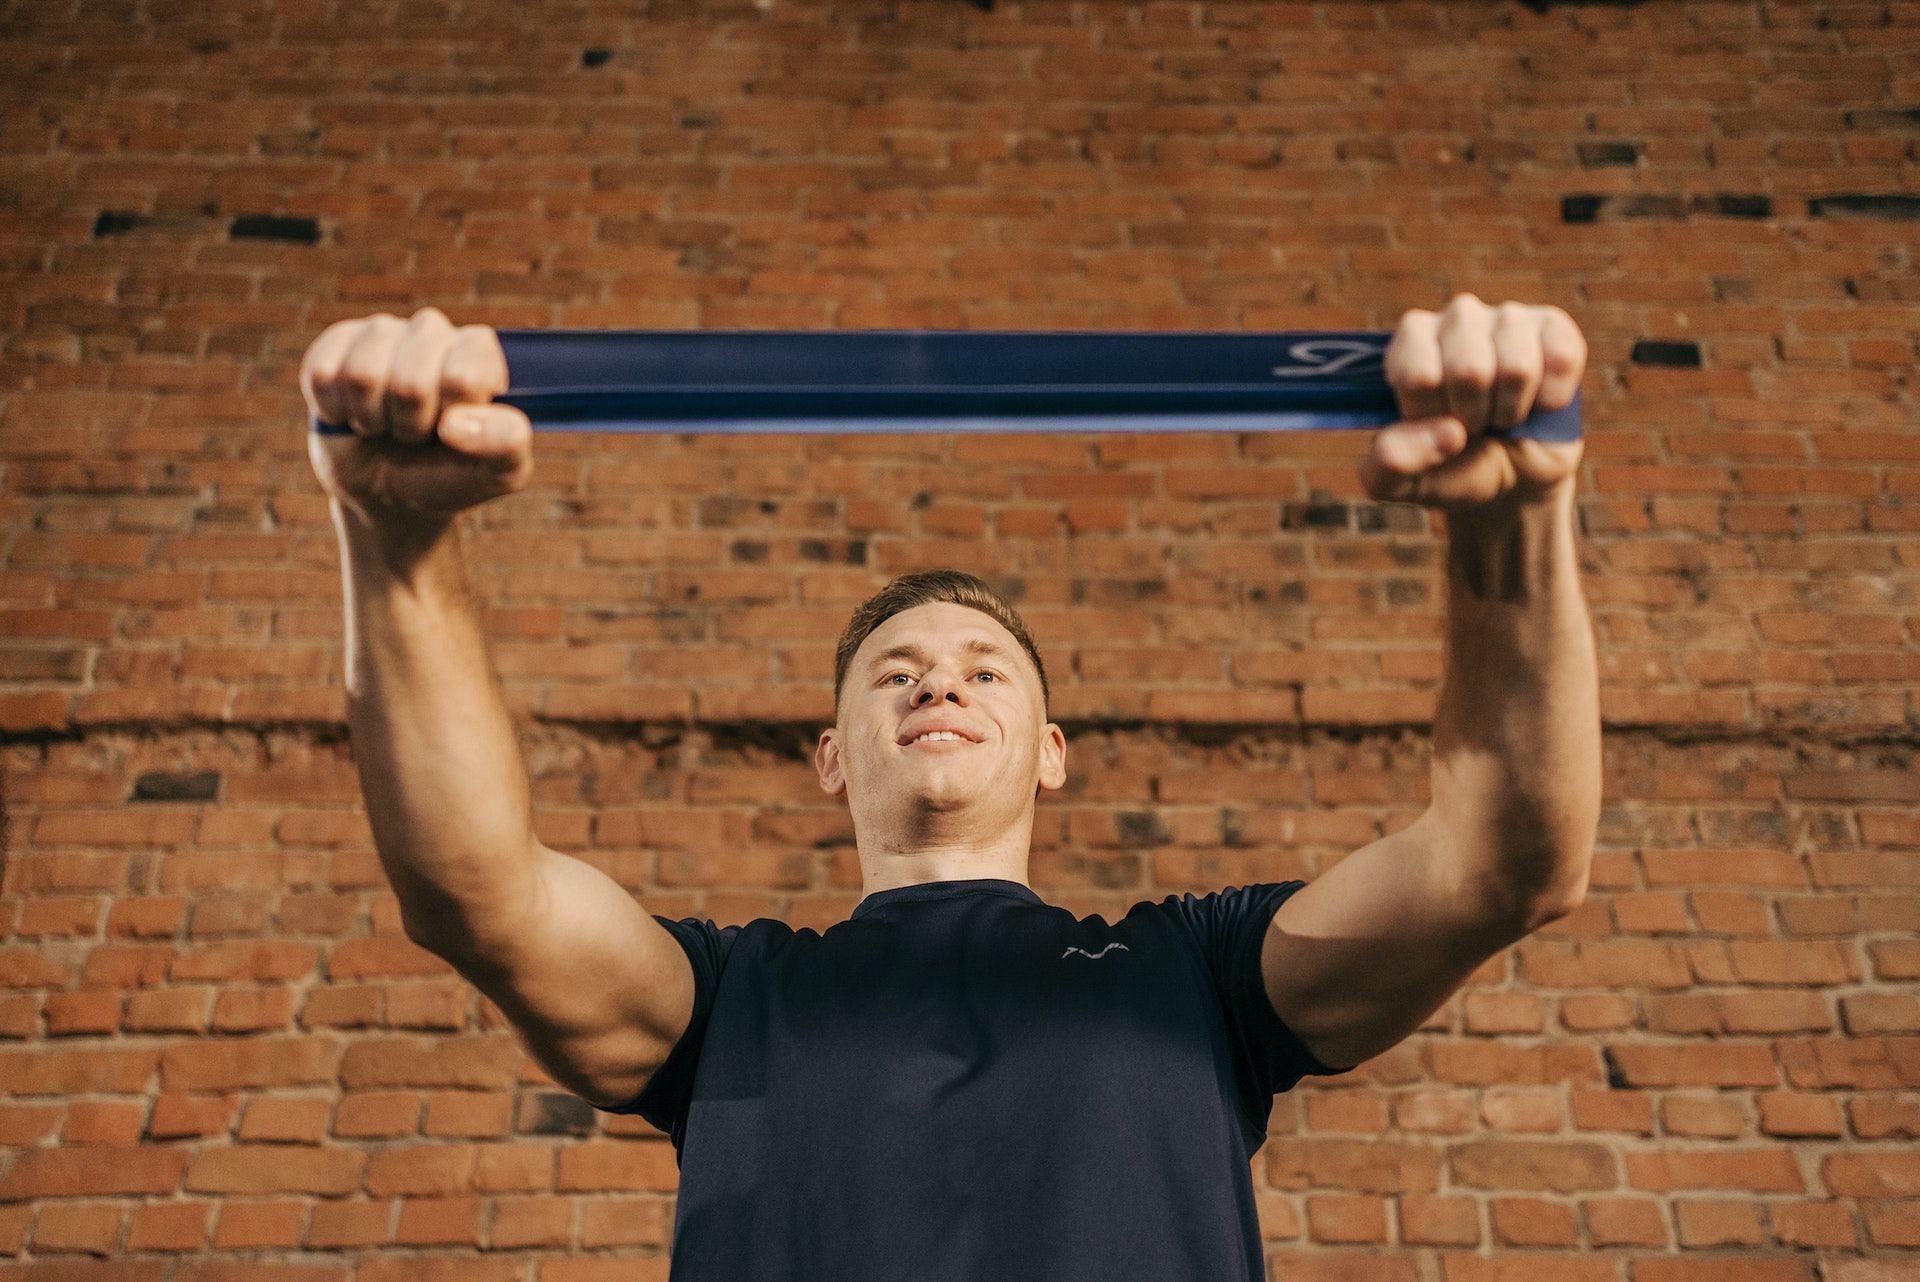 Resistance band exercises can add intensity to your workout. (Photo via Pexels/ Pavel Danilyuk)